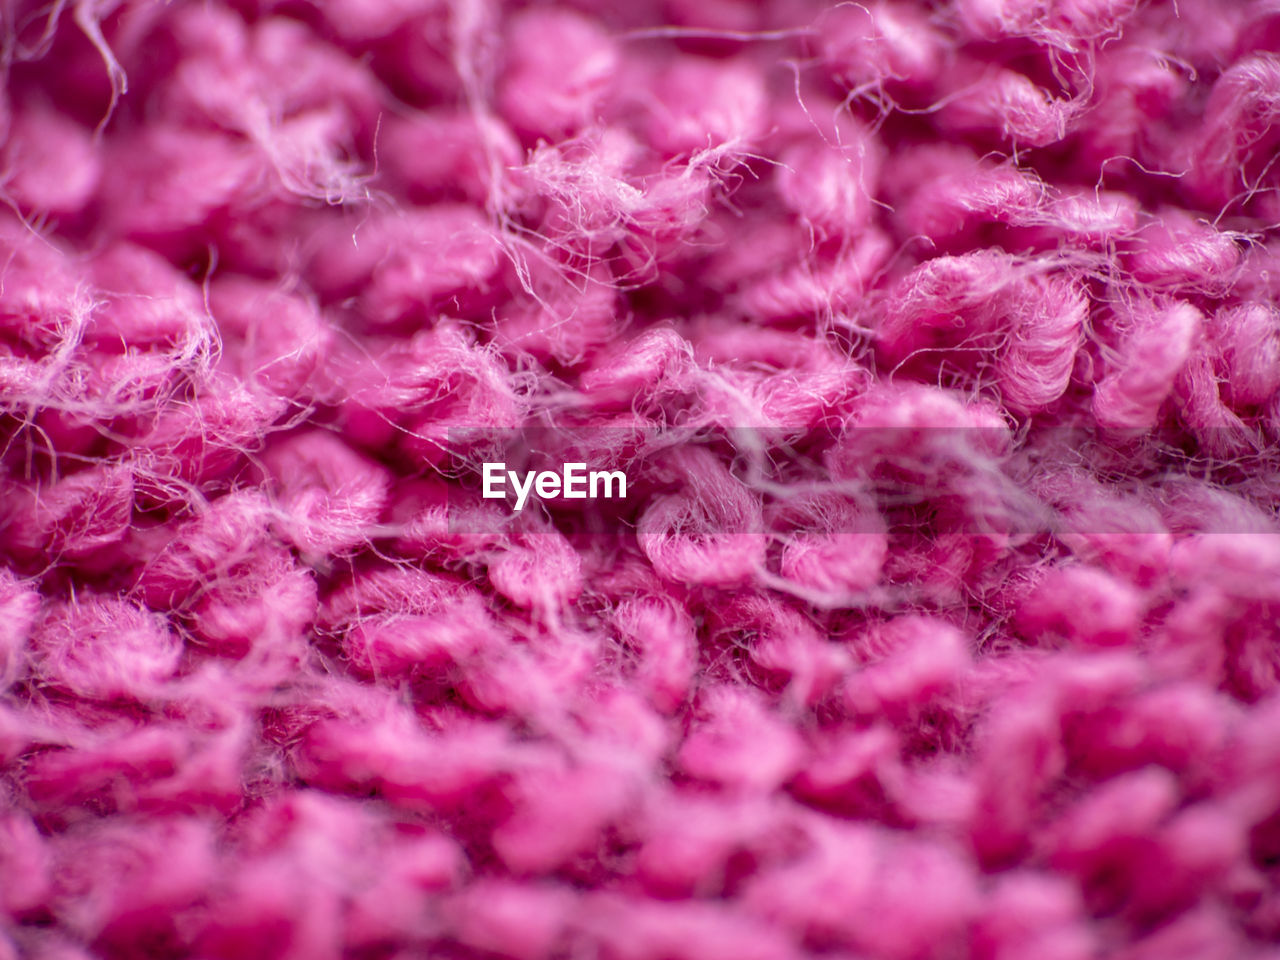 FULL FRAME SHOT OF PINK PETALS ON PURPLE FABRIC